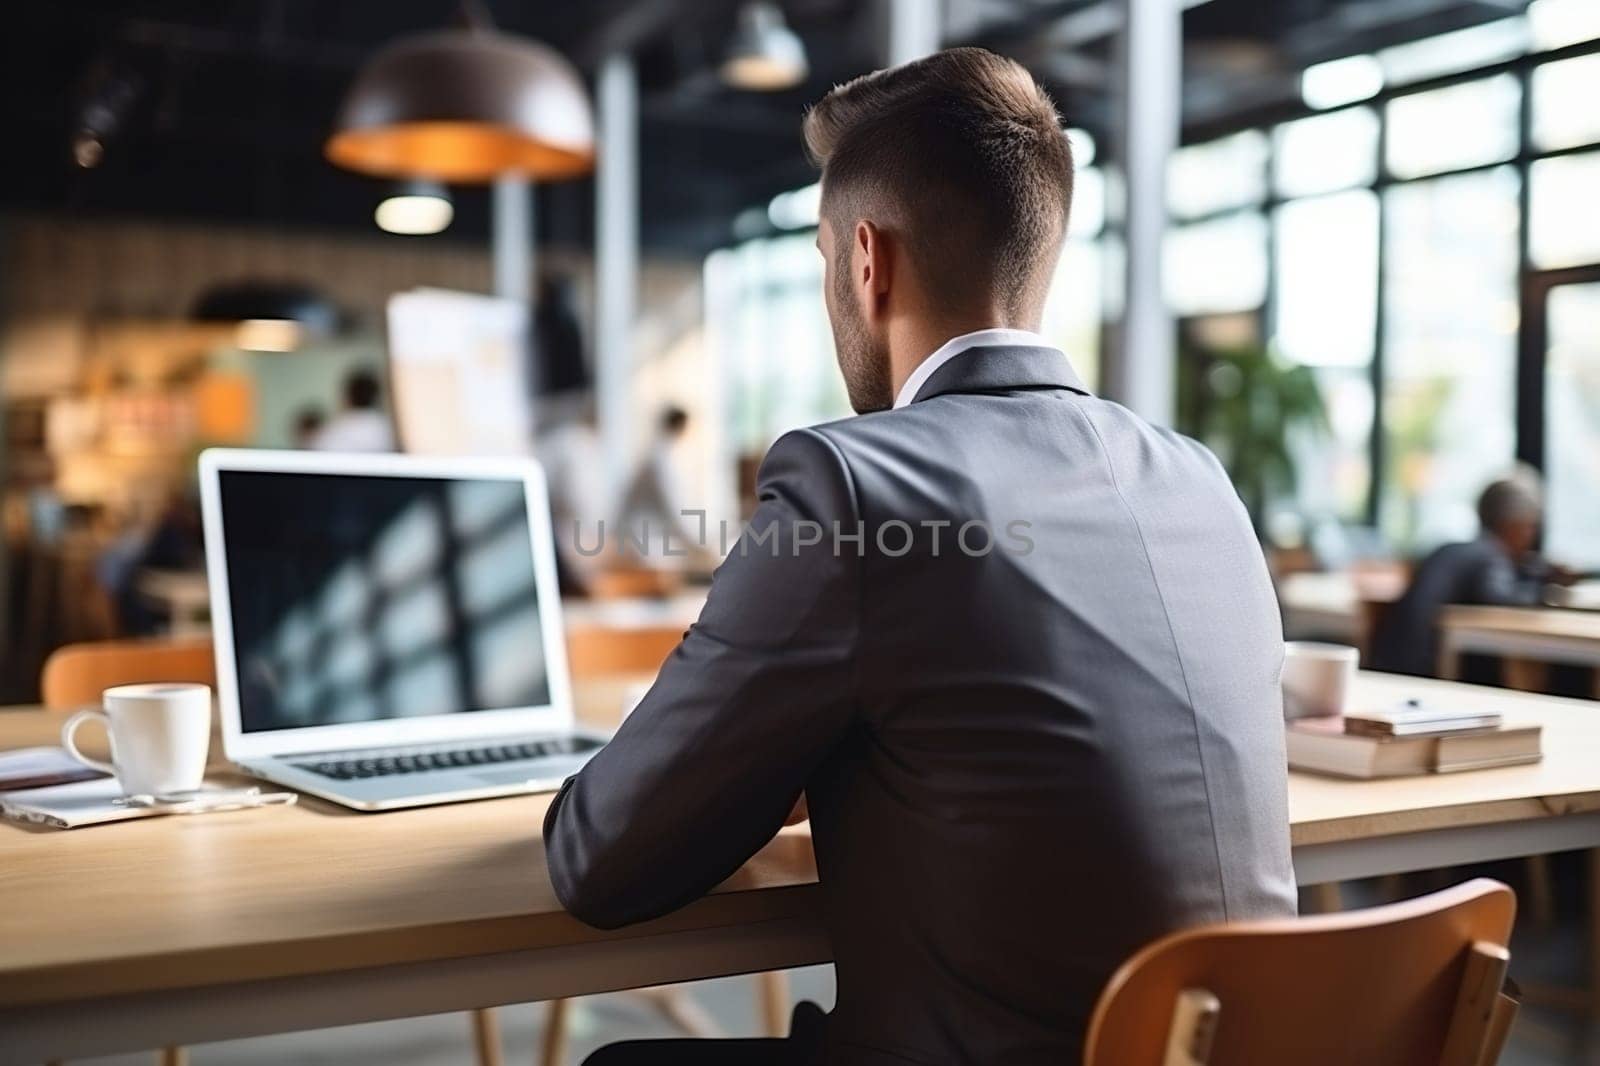 A man in a business suit with a laptop sits in a cafe. Back view. Remote work concept.